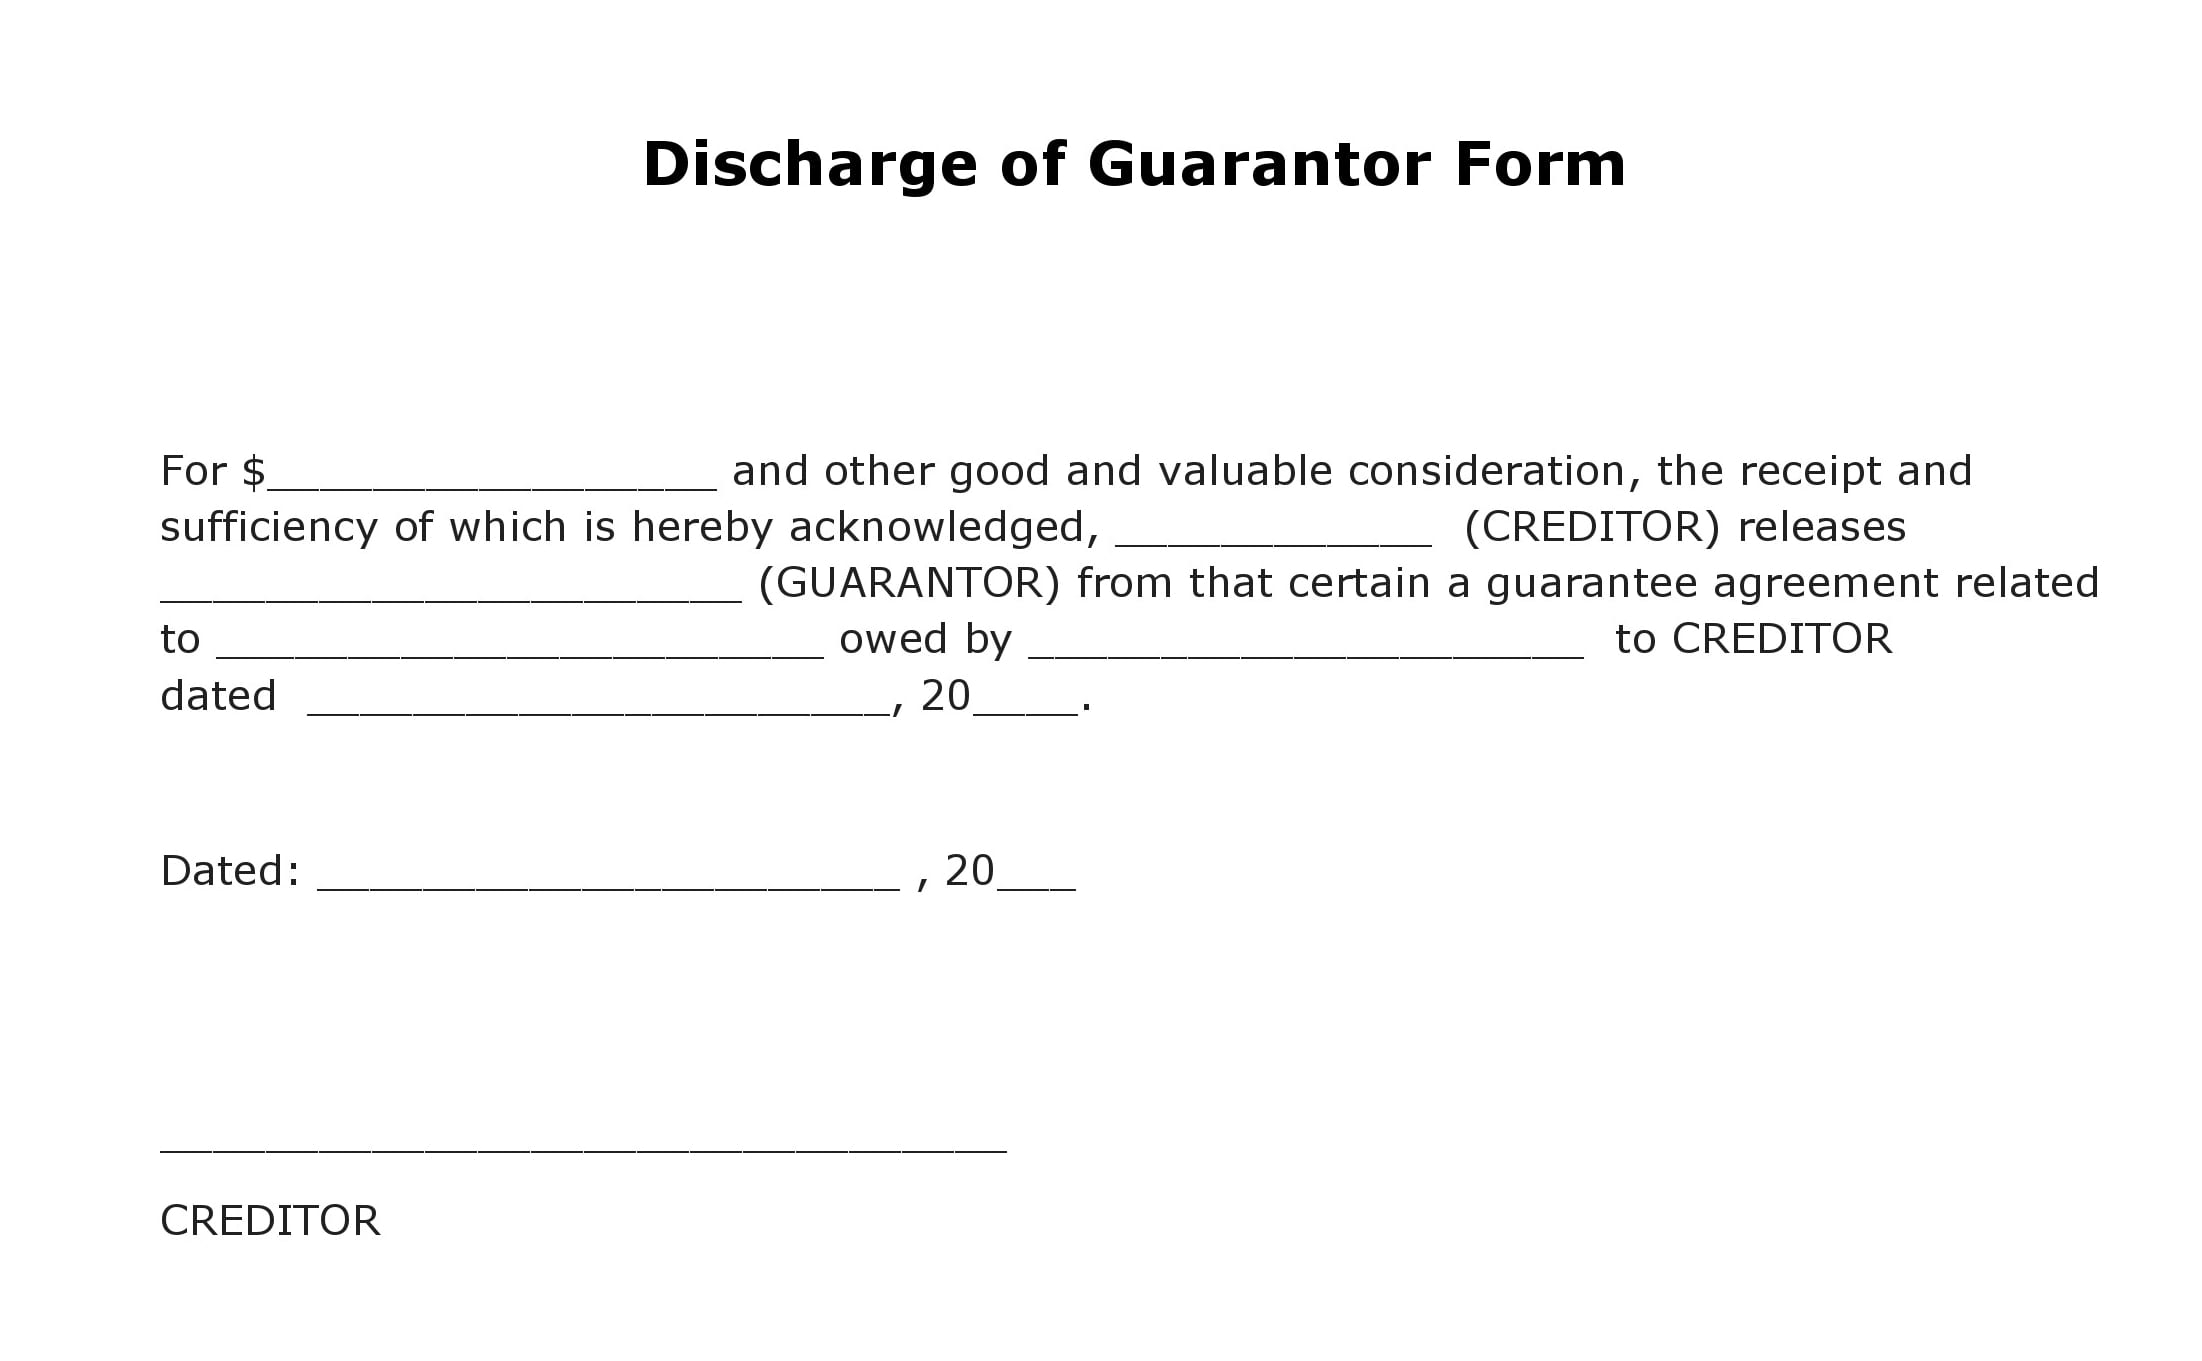 Guarantee Agreement Template Free Discharge Of Guarantor Form Pdf Template Form Download